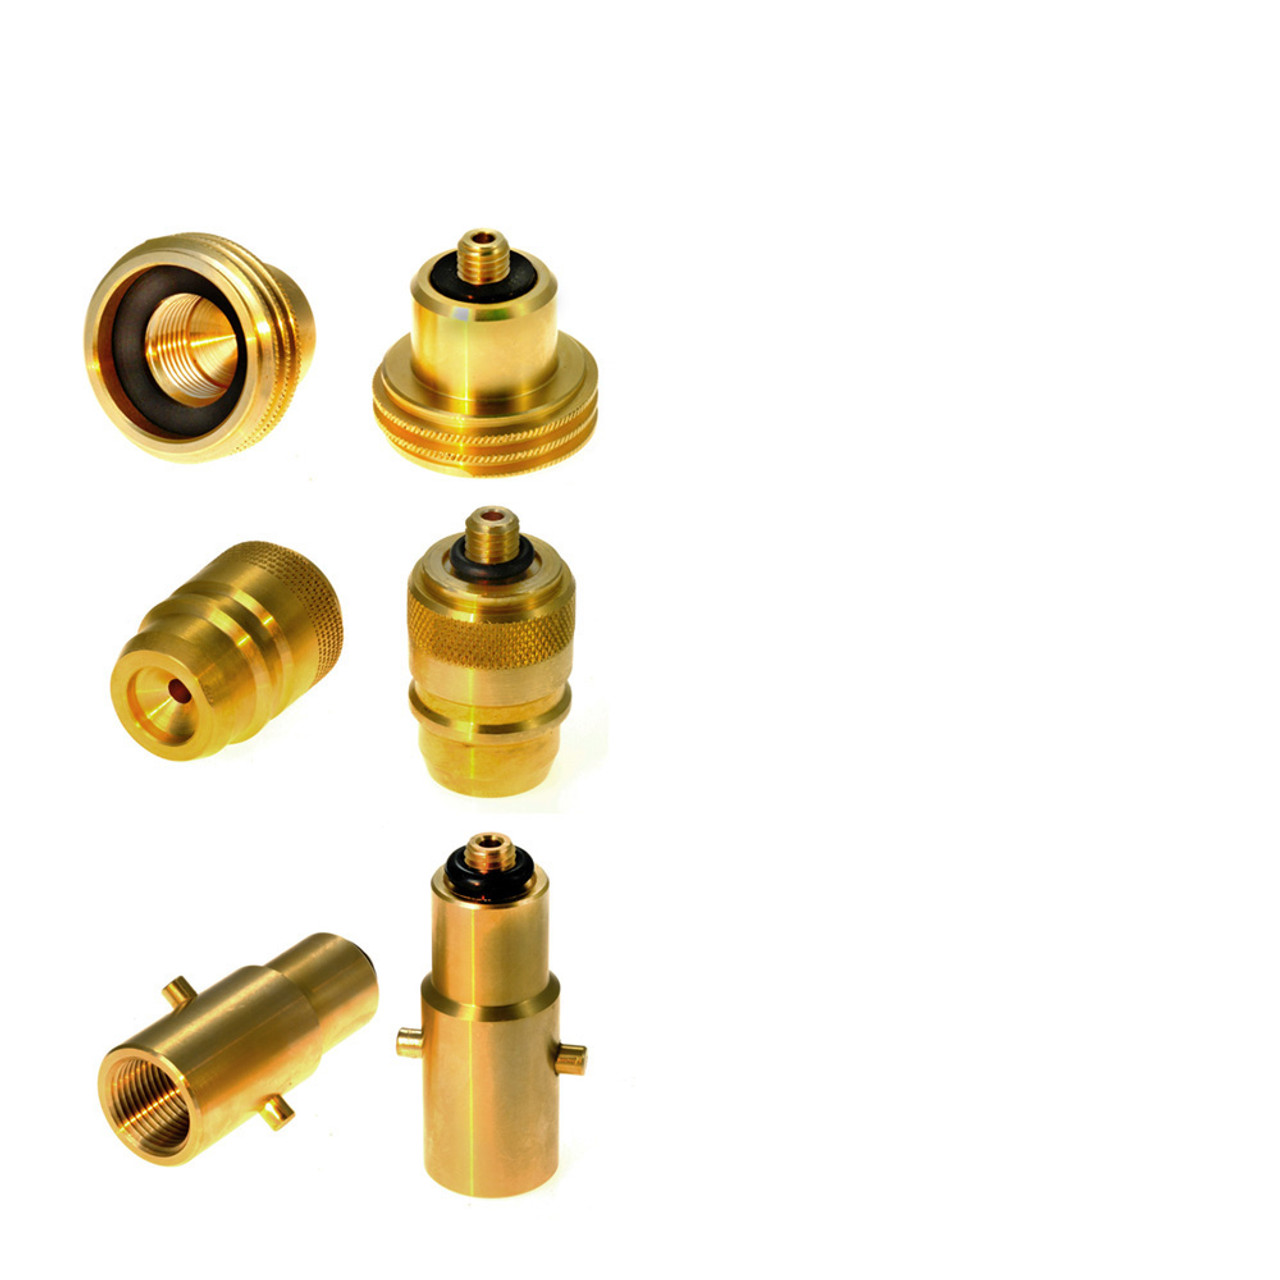 Dish (M10) to All Europe LPG Filling Adapters SET